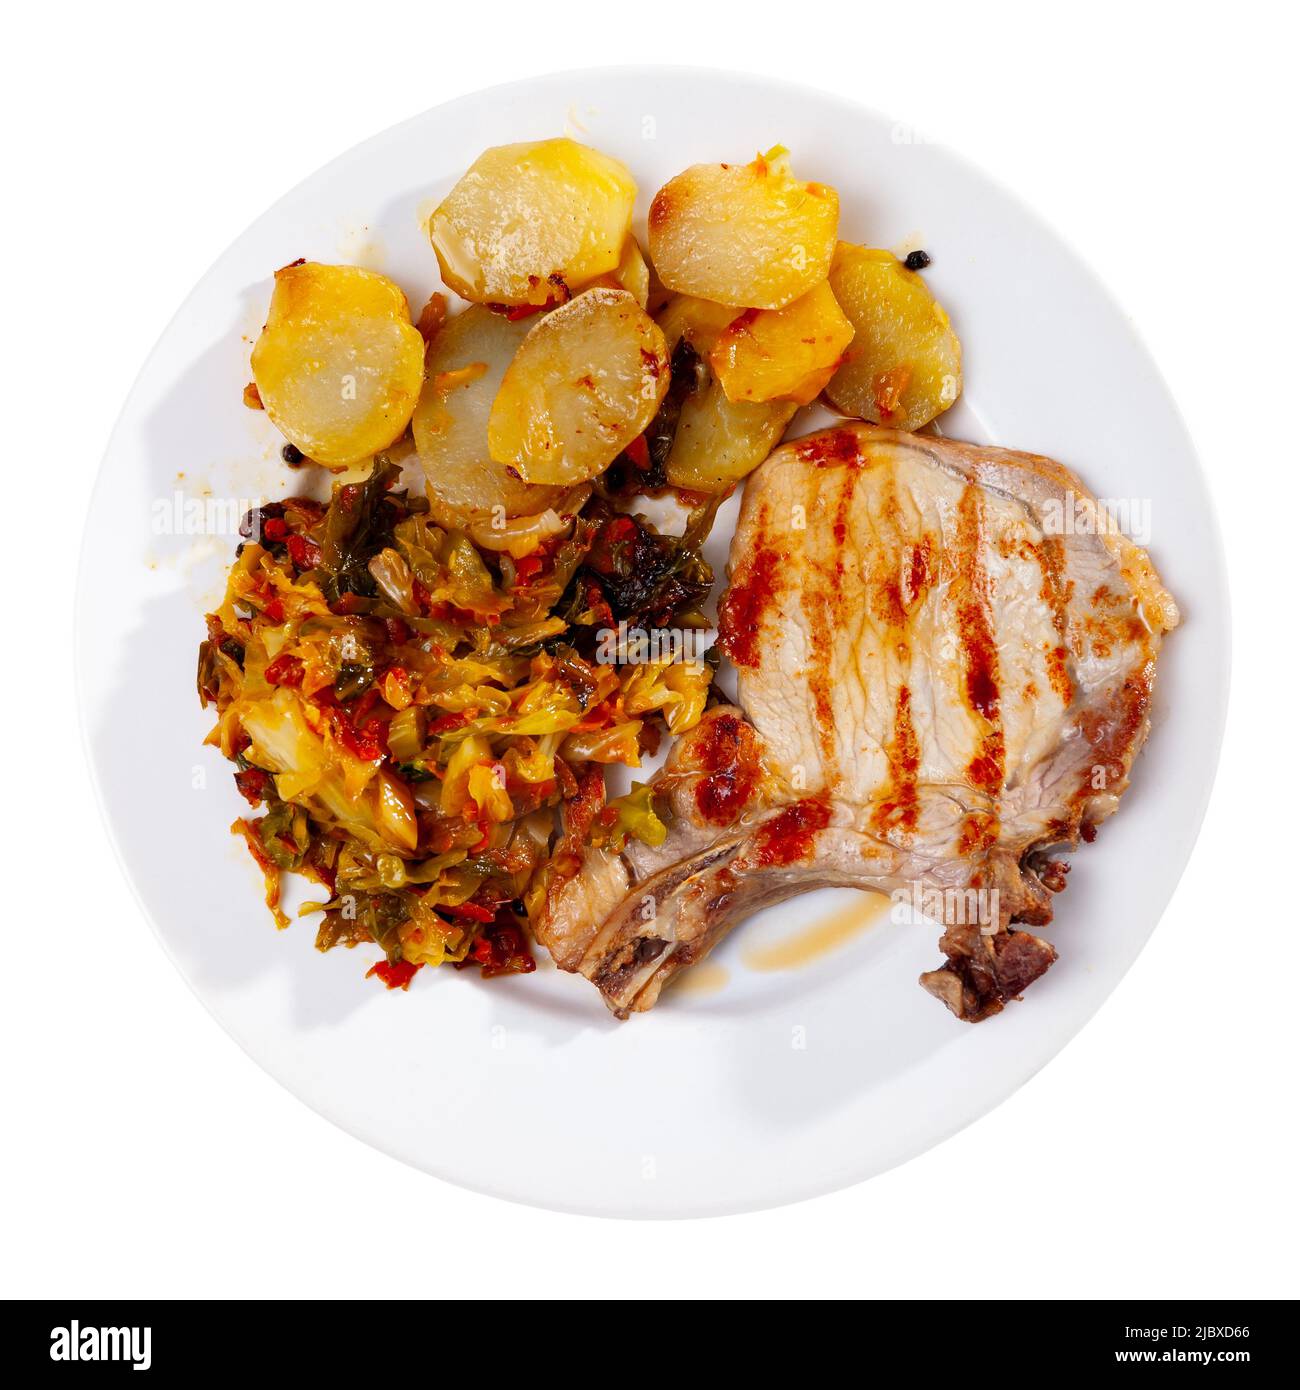 Pork with potatoes and stewed cabbage Stock Photo